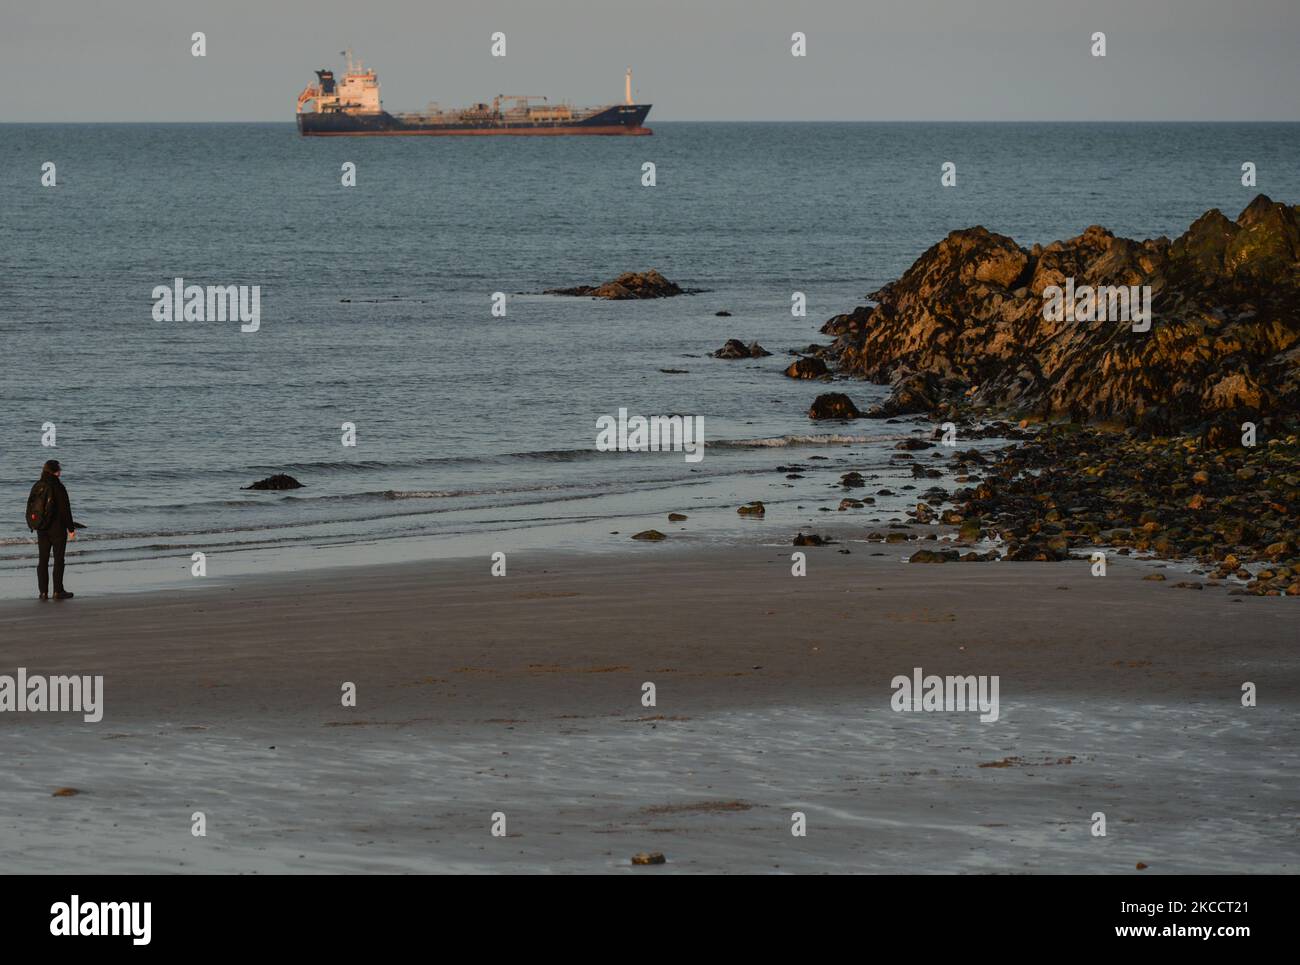 A man watches a boat in the sea near Bray's rocky beach at sunset, during the COVID-19 lockdown. On Thursday, 15 April 2021, in Bray, County Wicklow, Ireland. (Photo by Artur Widak/NurPhoto) Stock Photo